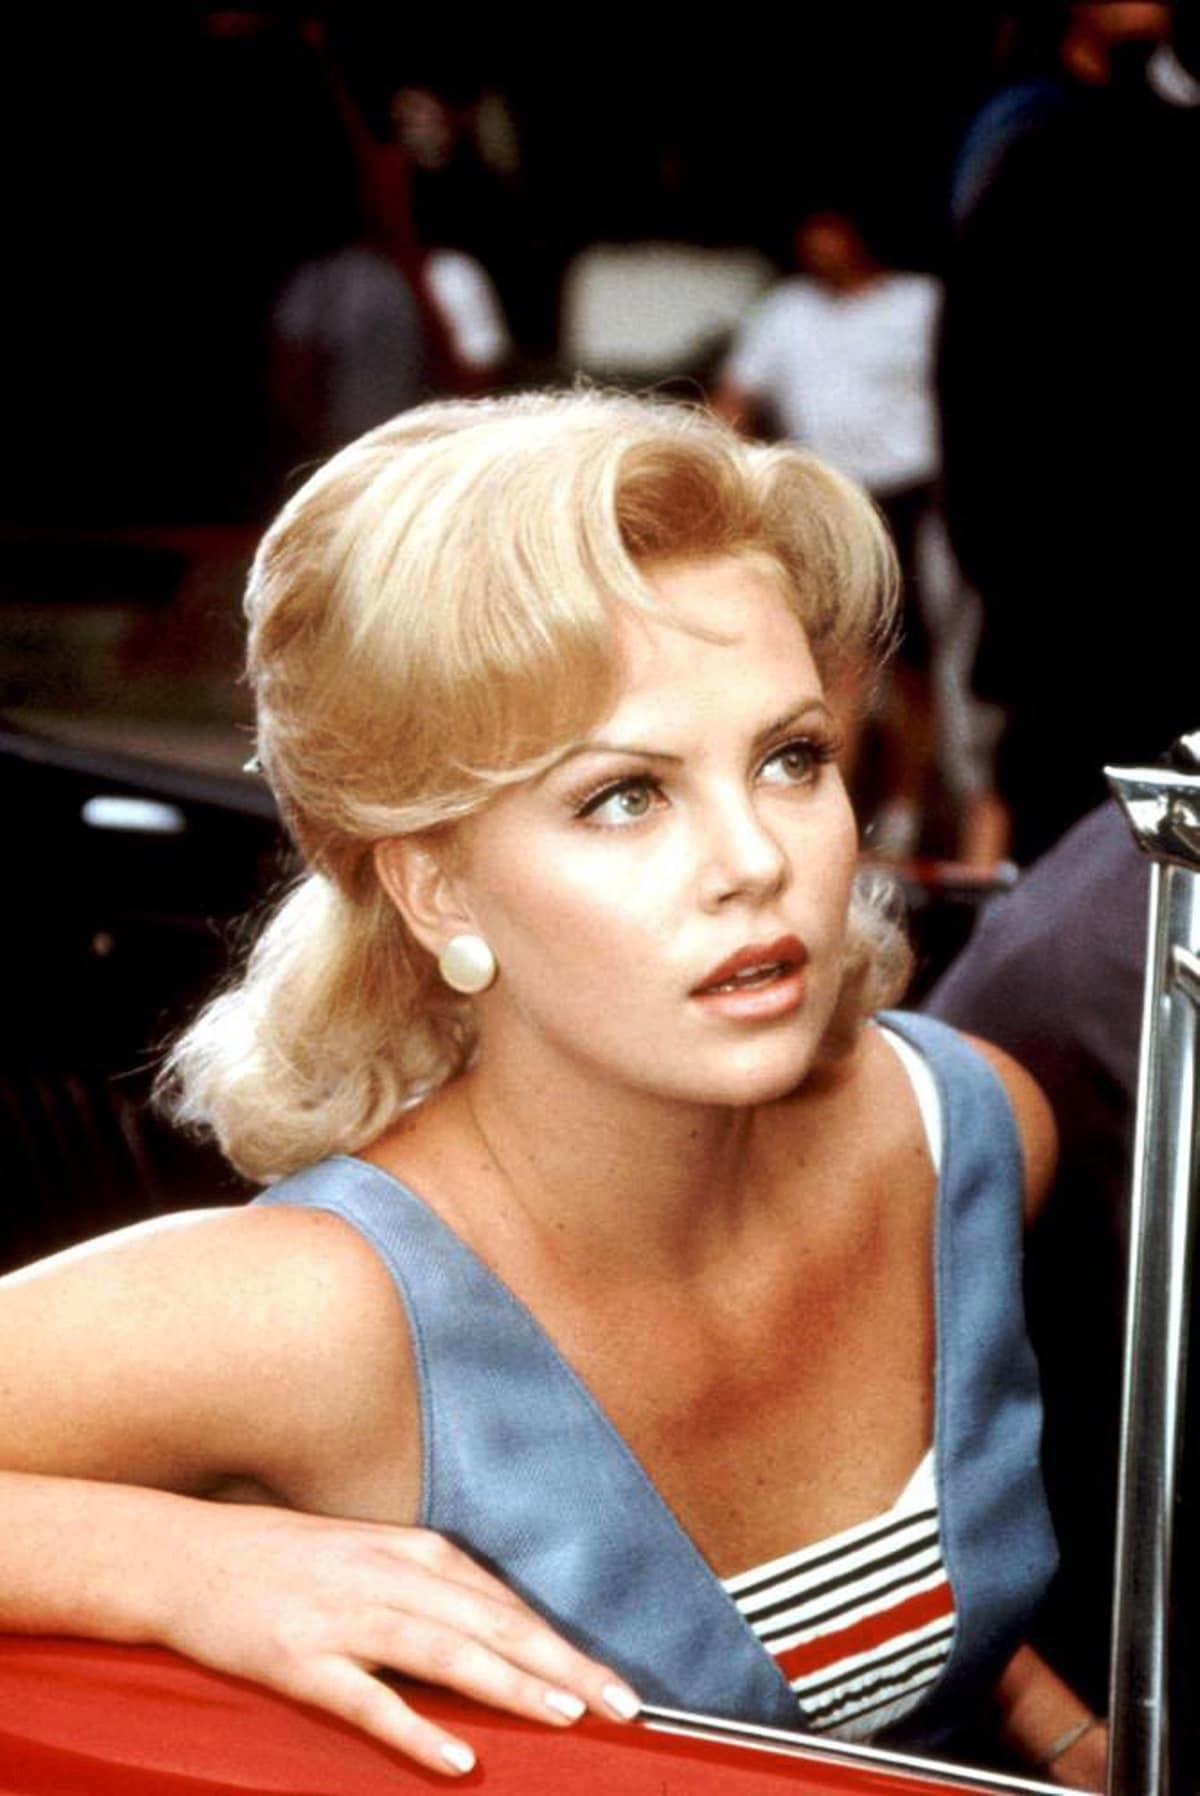 Charlize Theron played Tina Powers, the girlfriend of Jimmy Mattingly, in the 1996 American comedy film That Thing You Do!